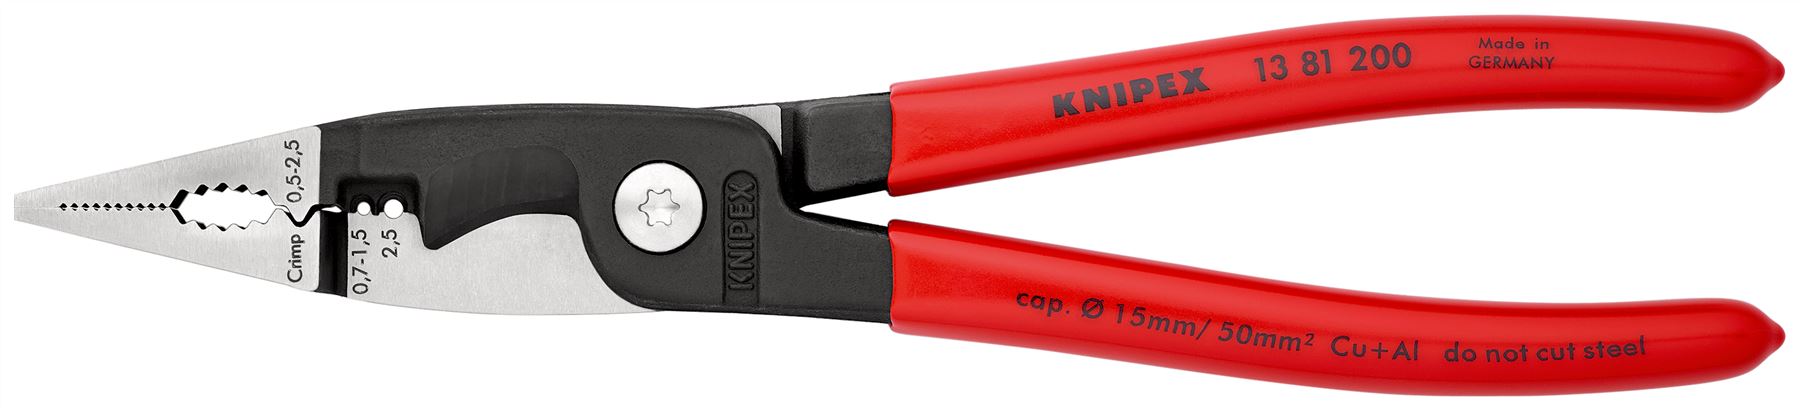 KNIPEX Pliers for Electrical Installation 200mm Plastic Coated 13 81 200 SB